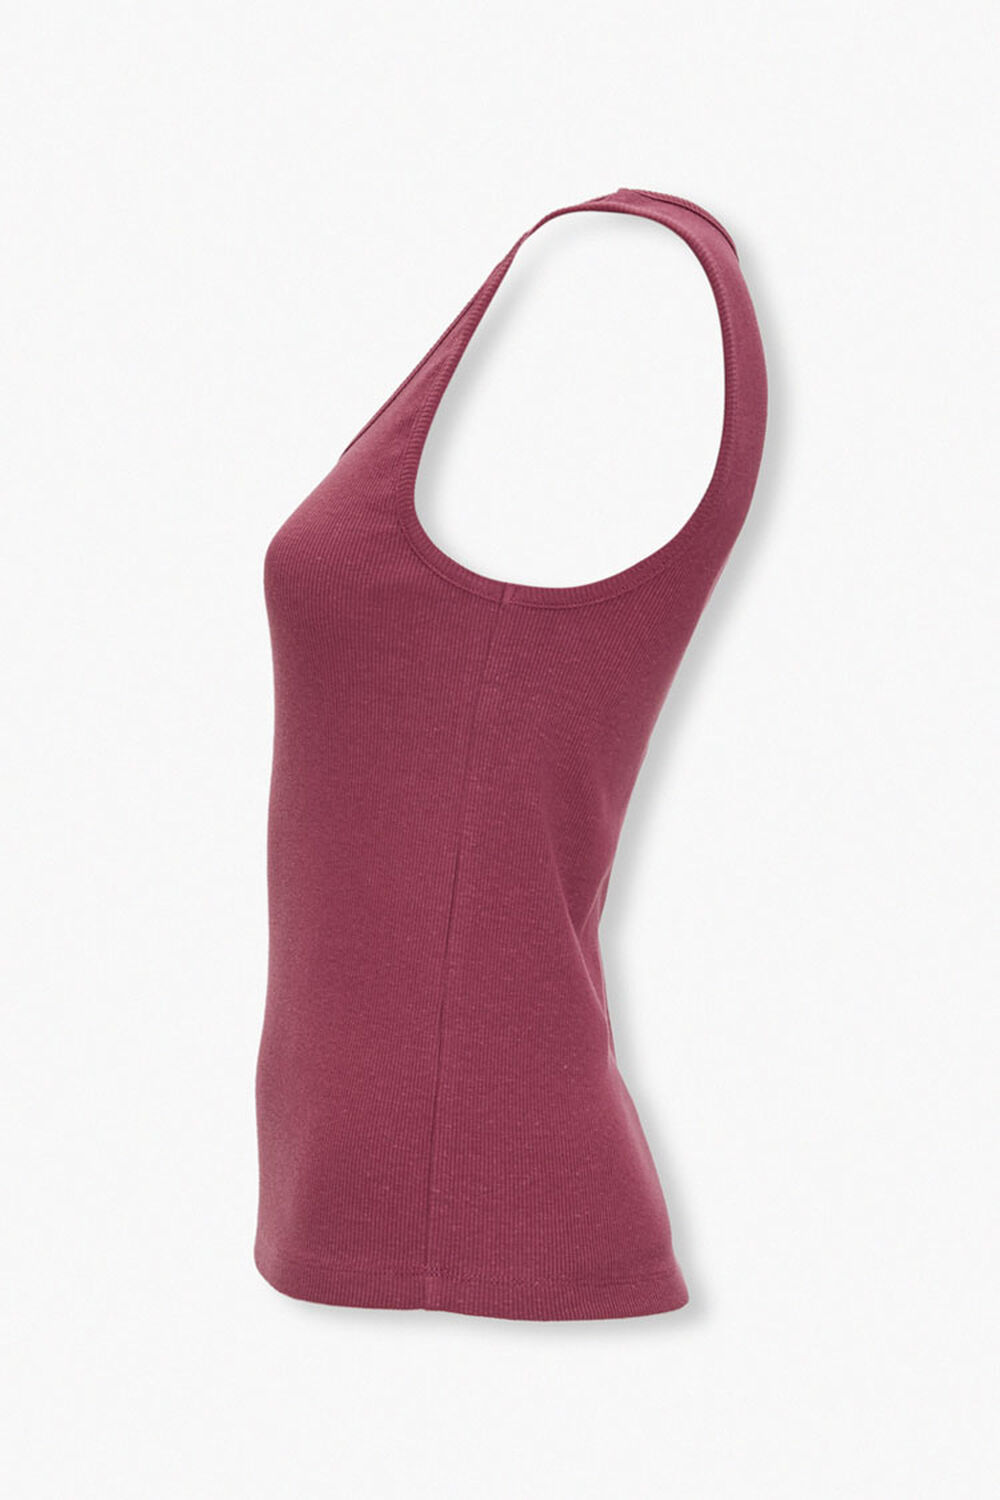 BERRY Ribbed Knit Tank Top, image 2